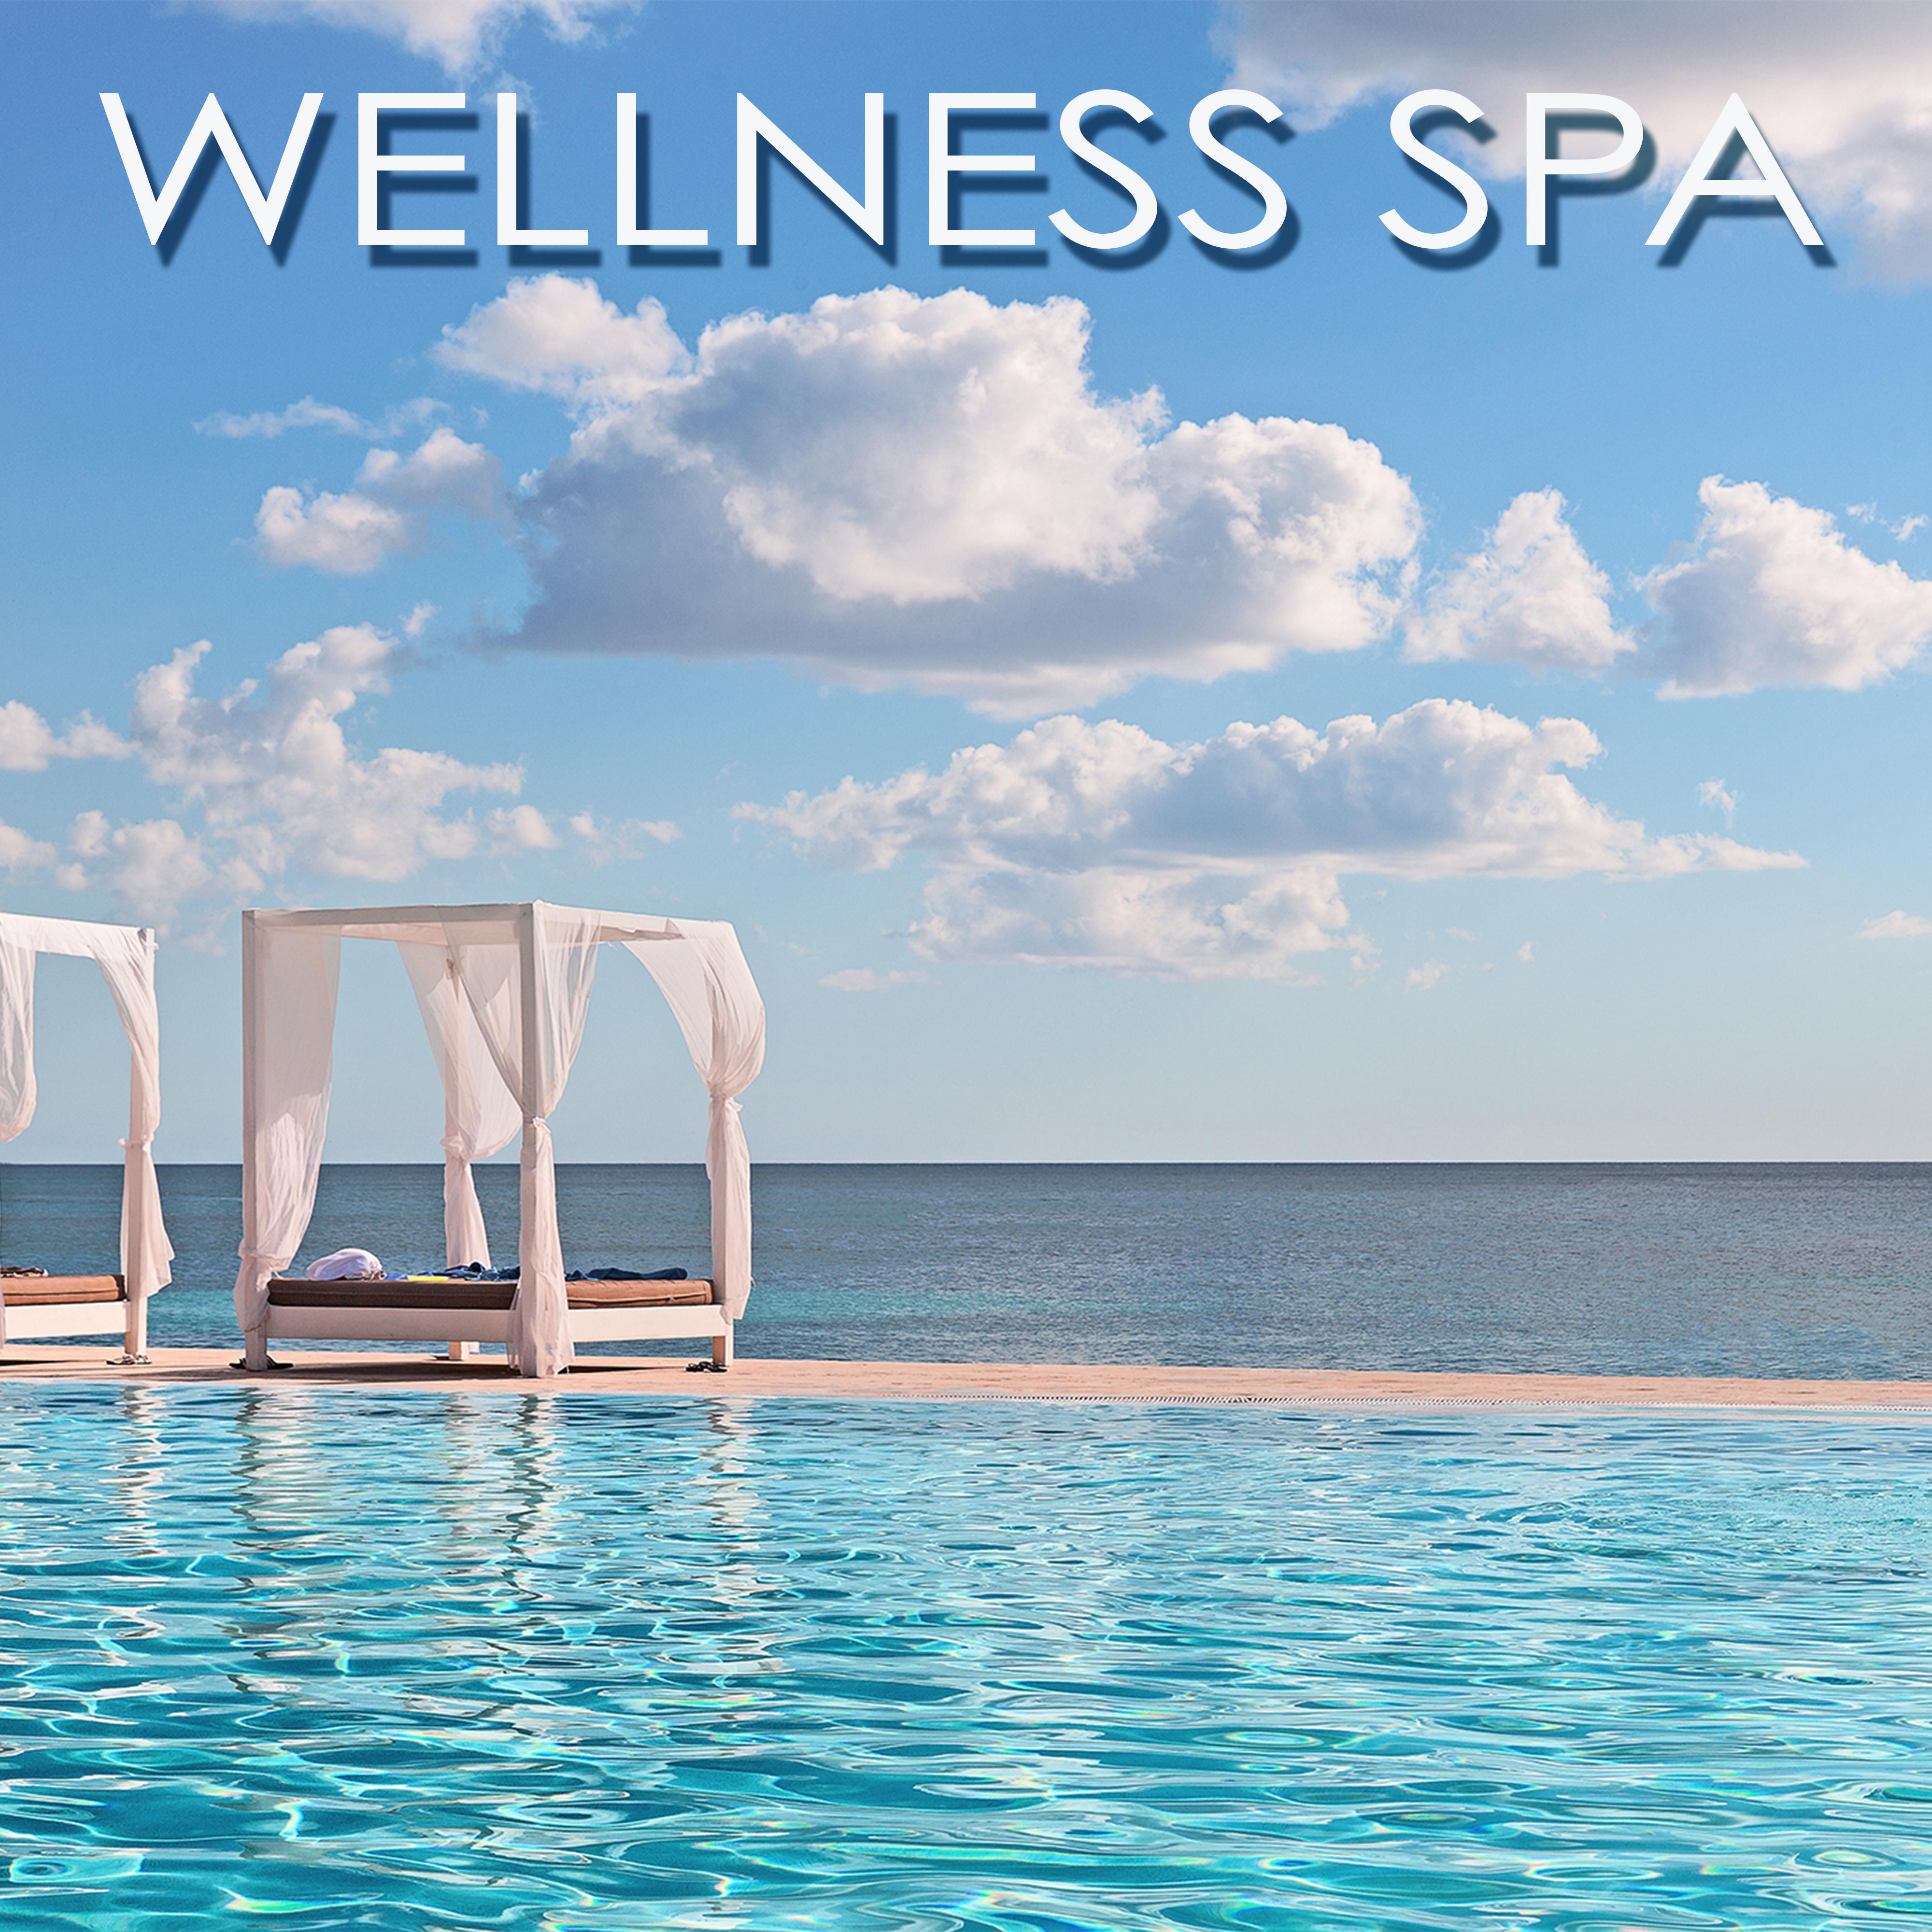 Wellness Spa – Spa Resort Soothing Music, Relaxing and Peaceful Songs with Ambient Sounds for Massage & Stress Relief